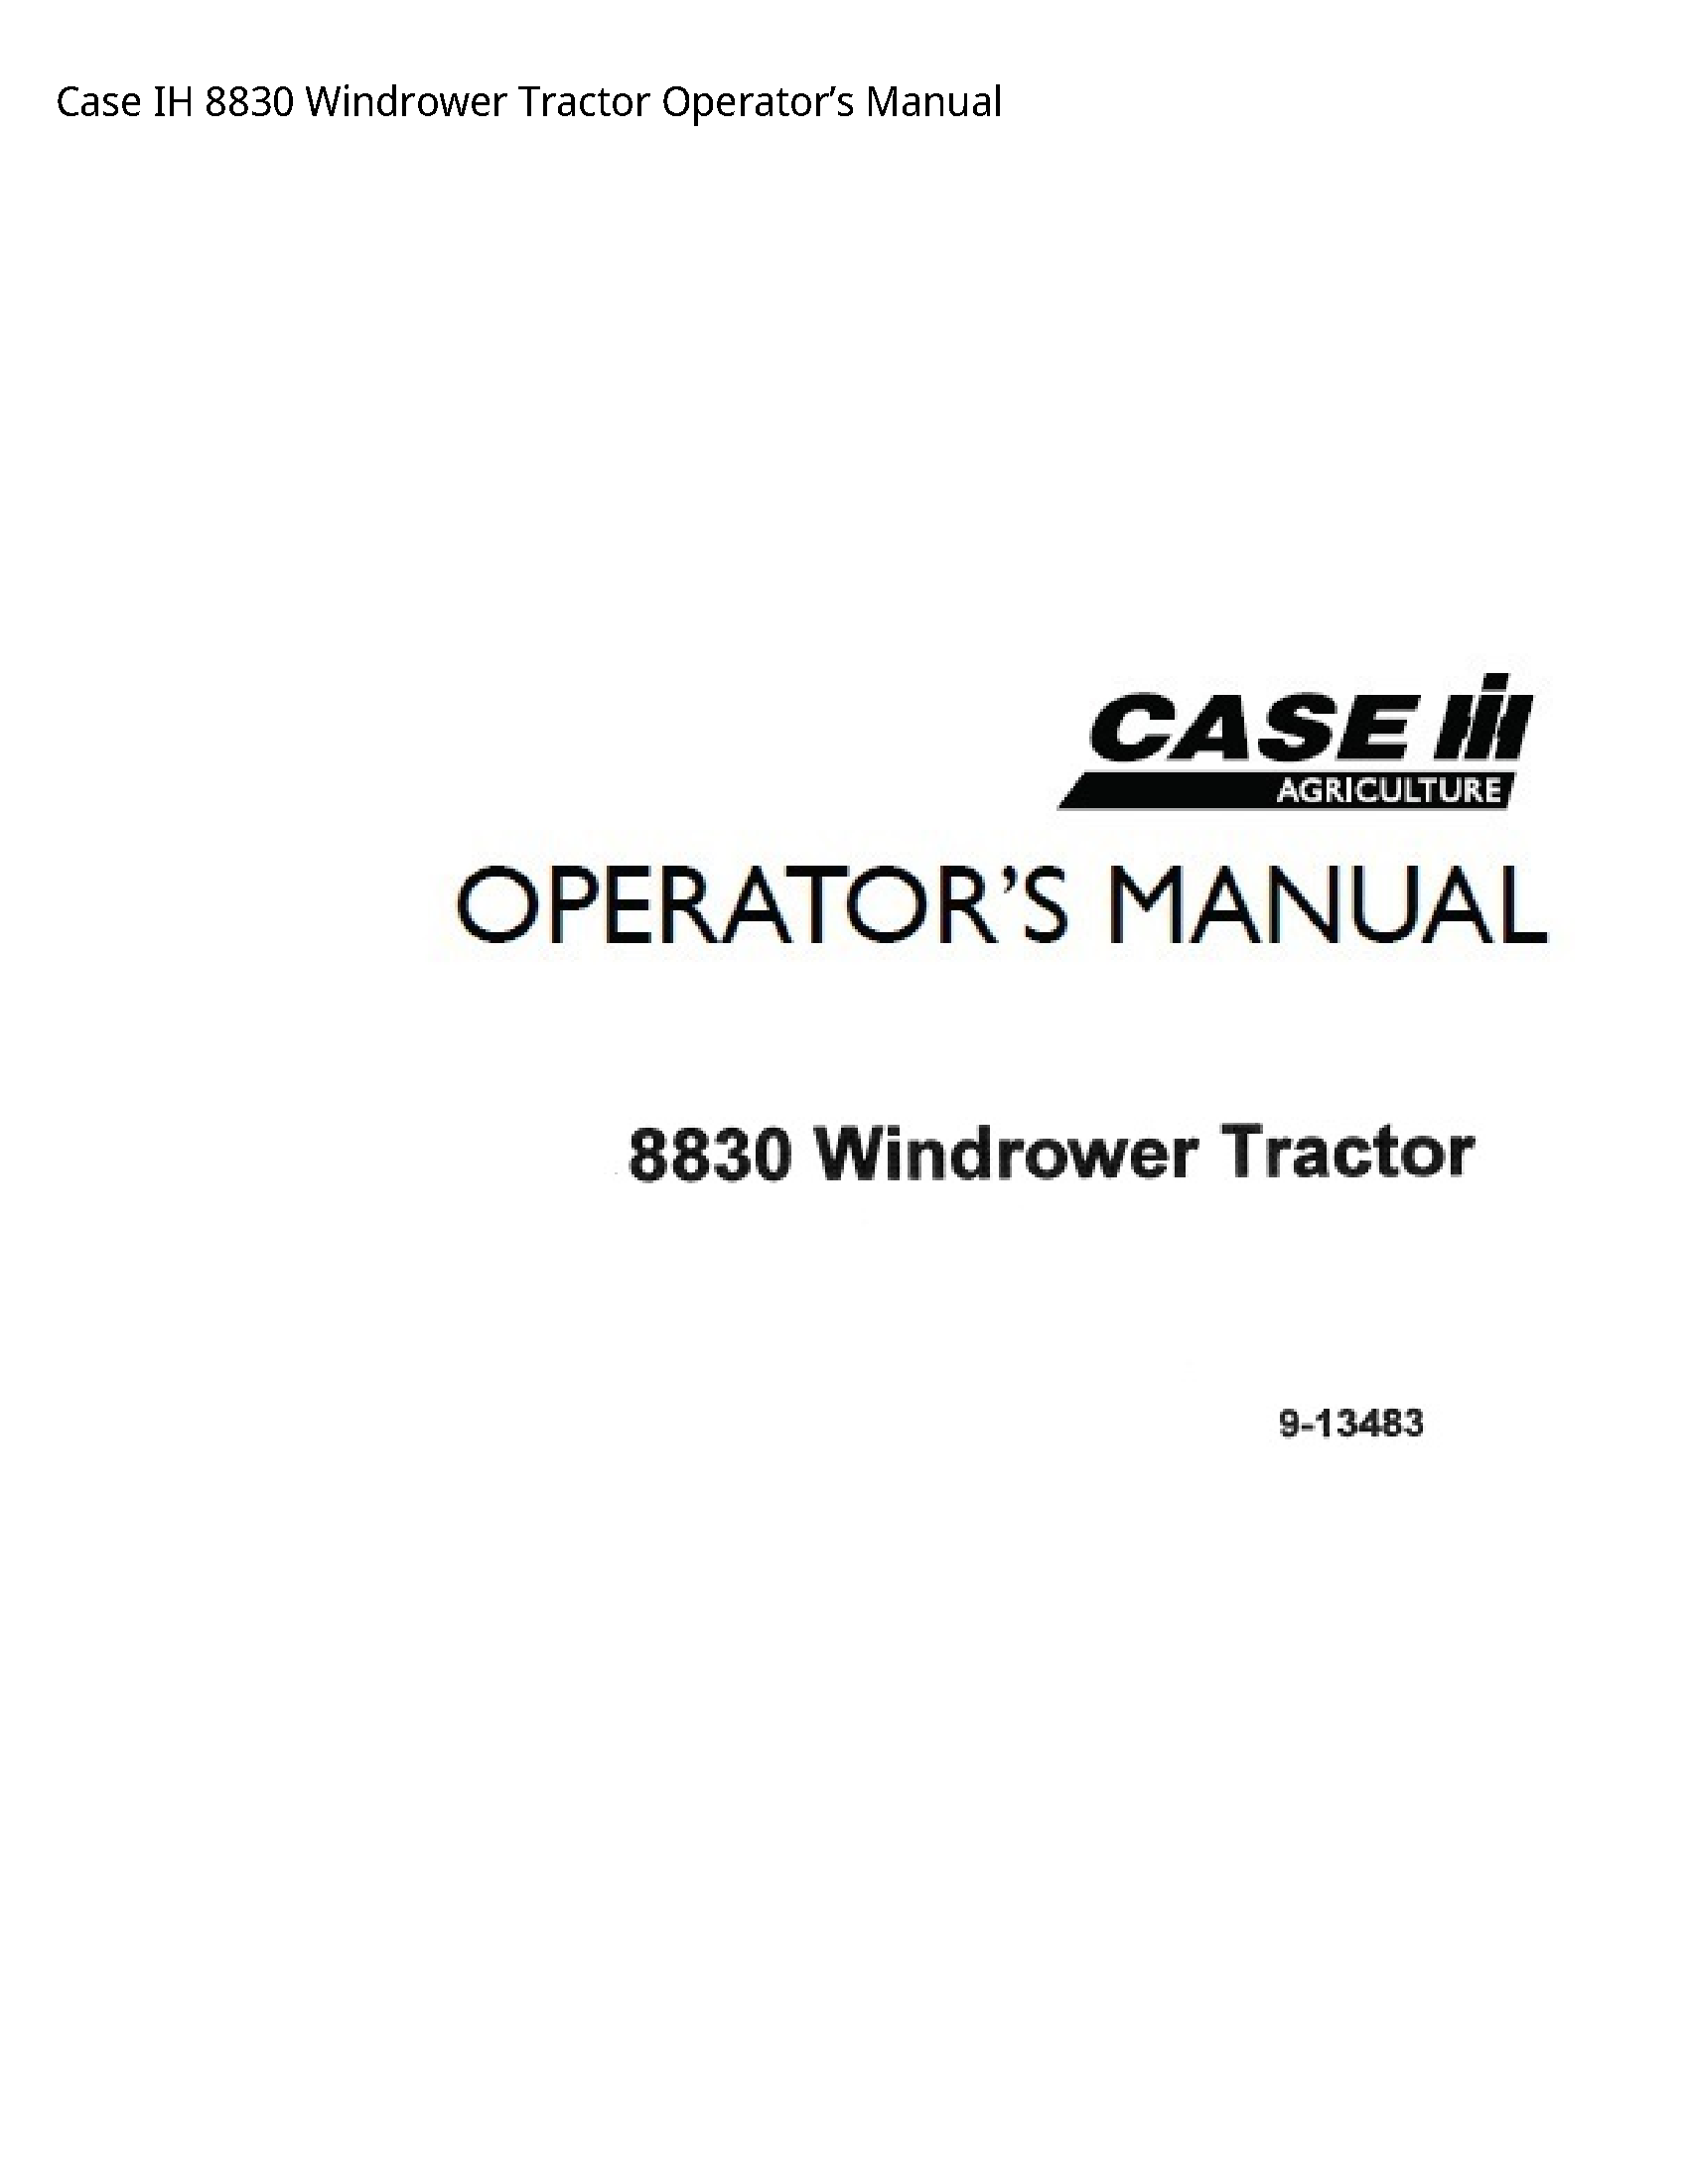 Case/Case IH 8830 IH Windrower Tractor Operator’s manual